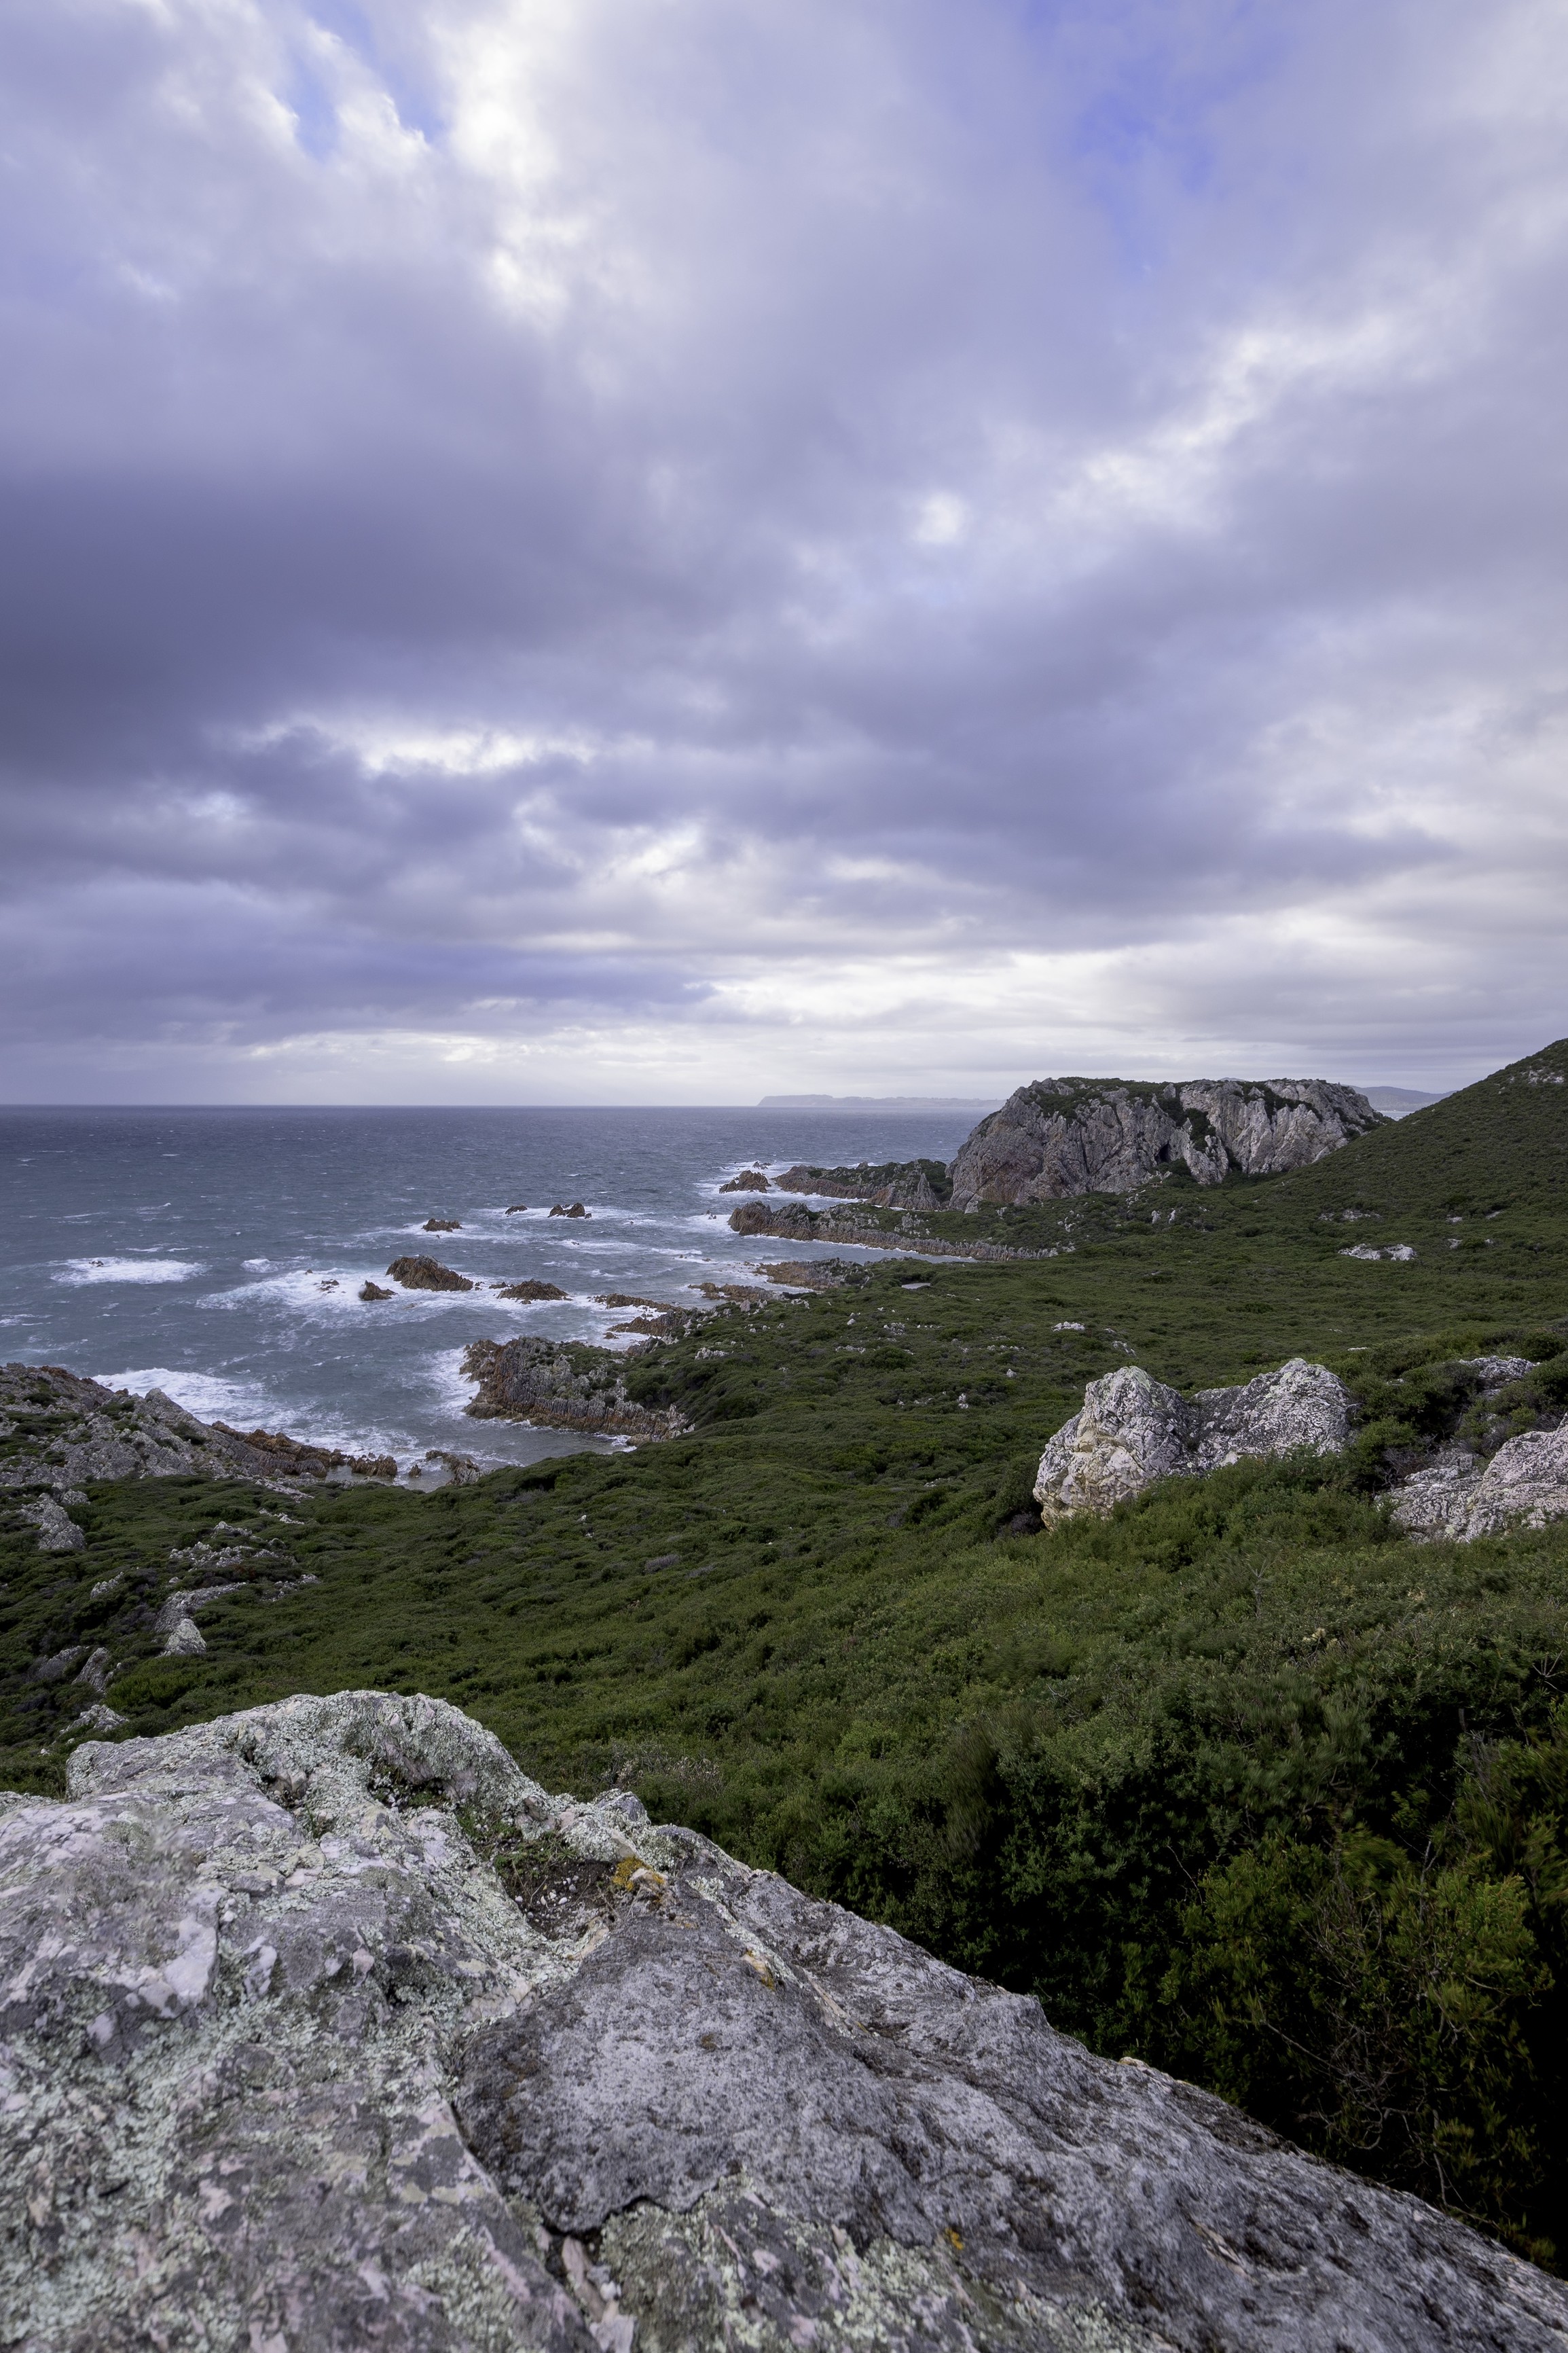 Rocky Cape National Park coastline. Surrounded by bush and larger rocks that lead to the ocean.